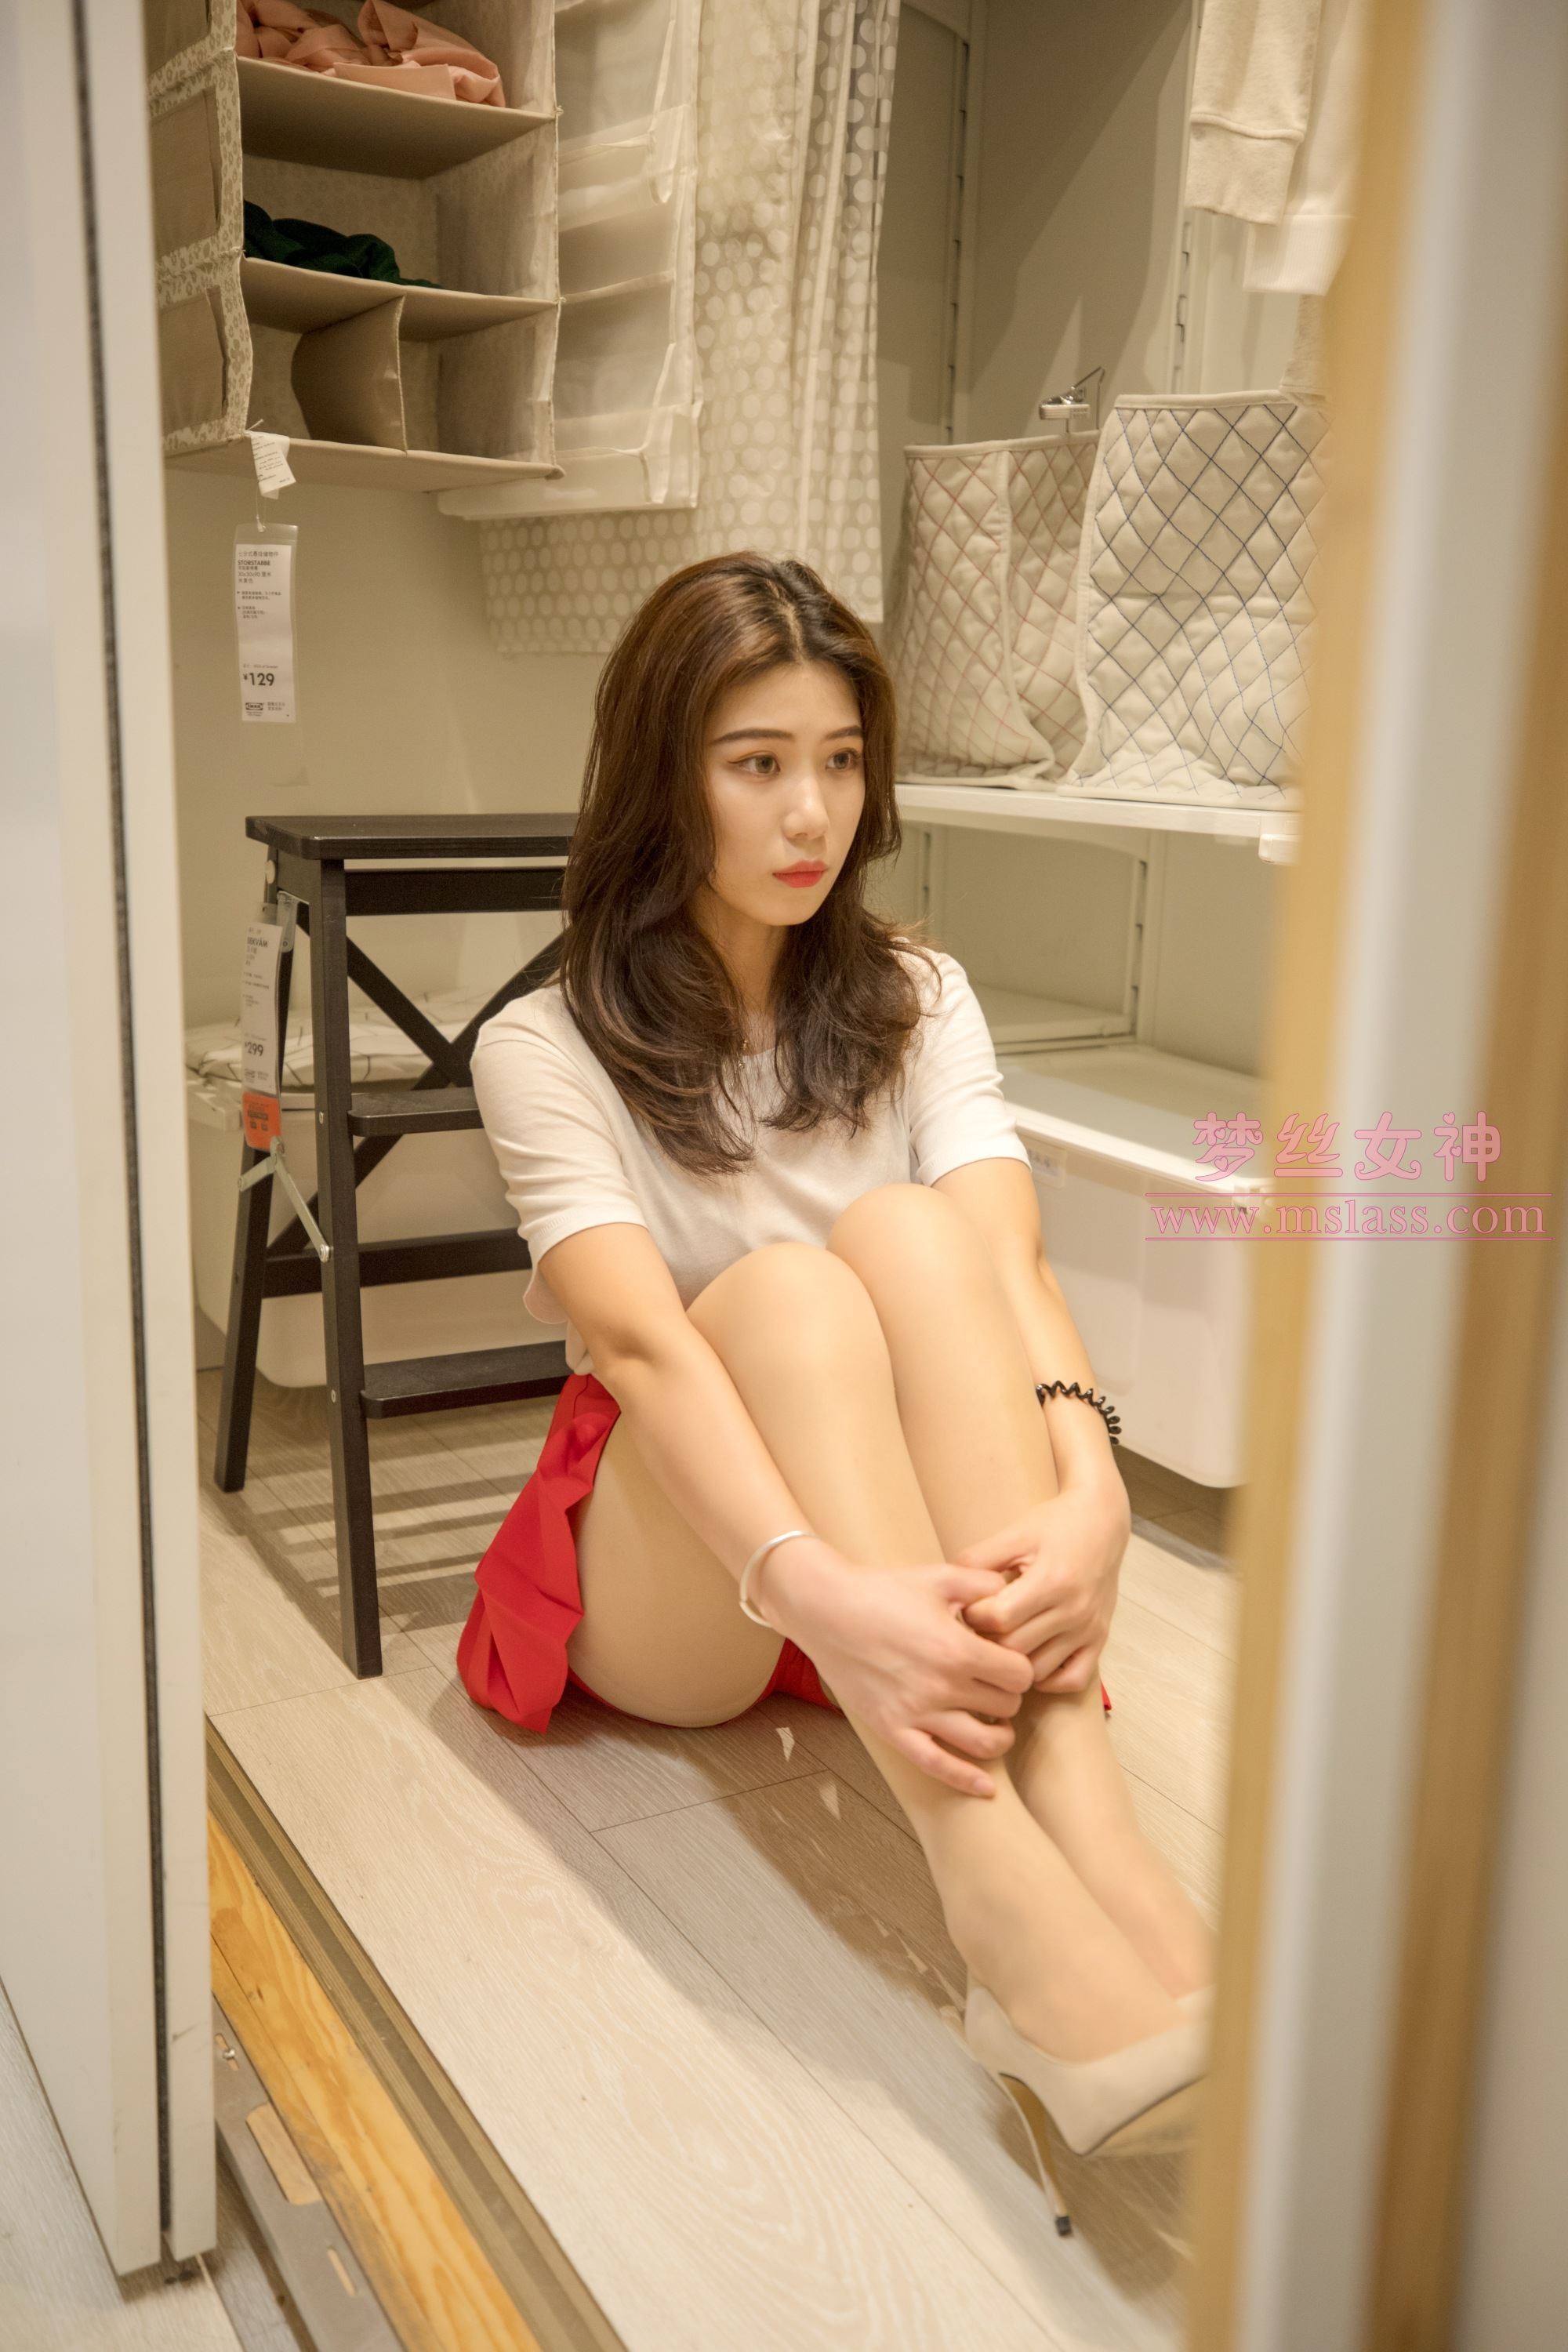 Mslass: the fitting room in the shopping mall on May 2, 2019